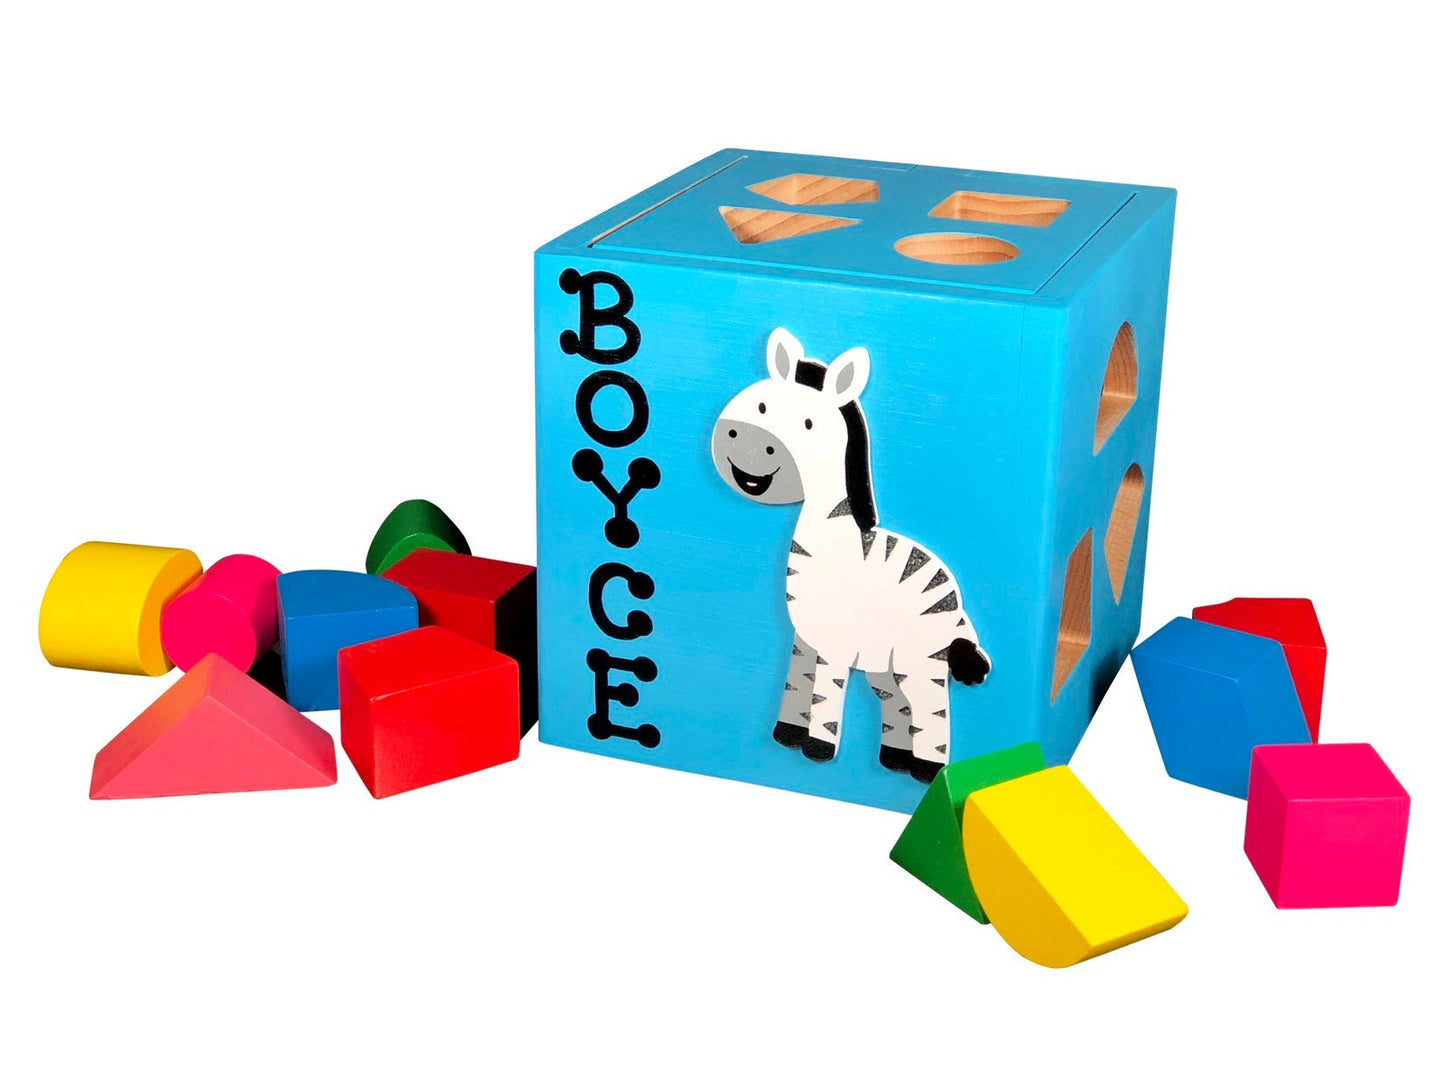 Wooden zebra toys for children eco friendly shapes box learn colors shapes letters read your name educational toys zebra safari animal toys